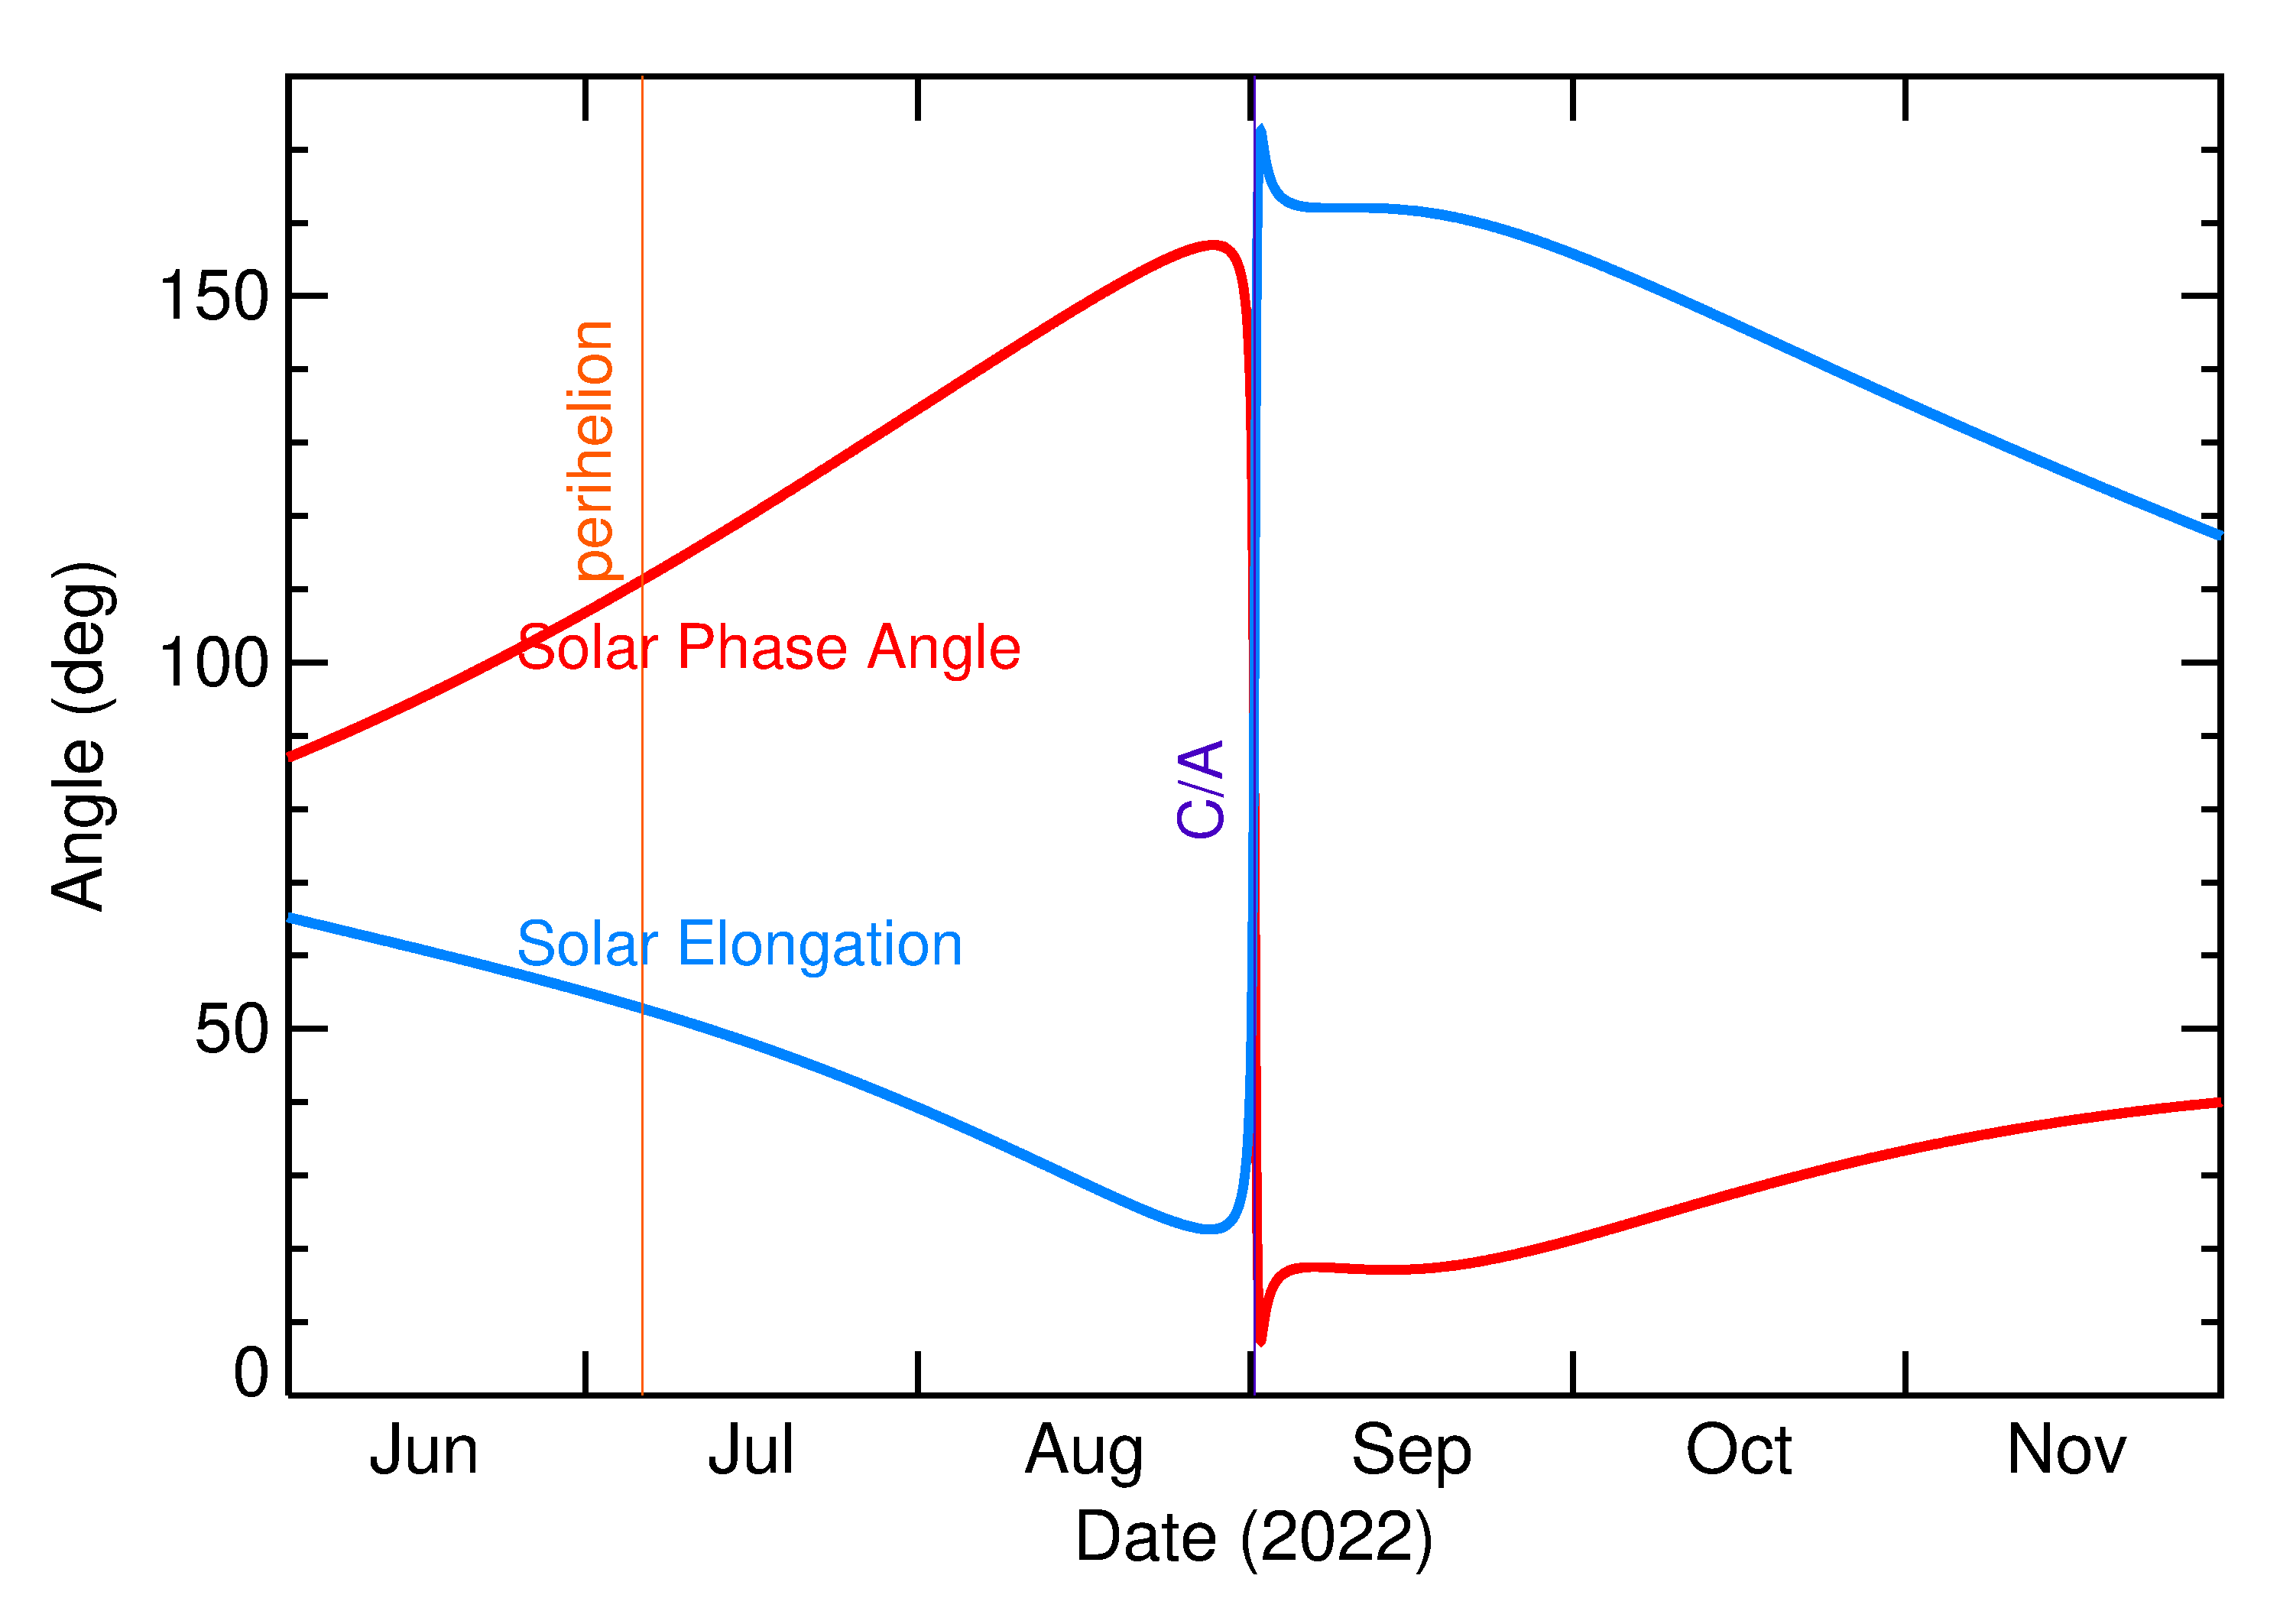 Solar Elongation and Solar Phase Angle of 2022 RL in the months around closest approach